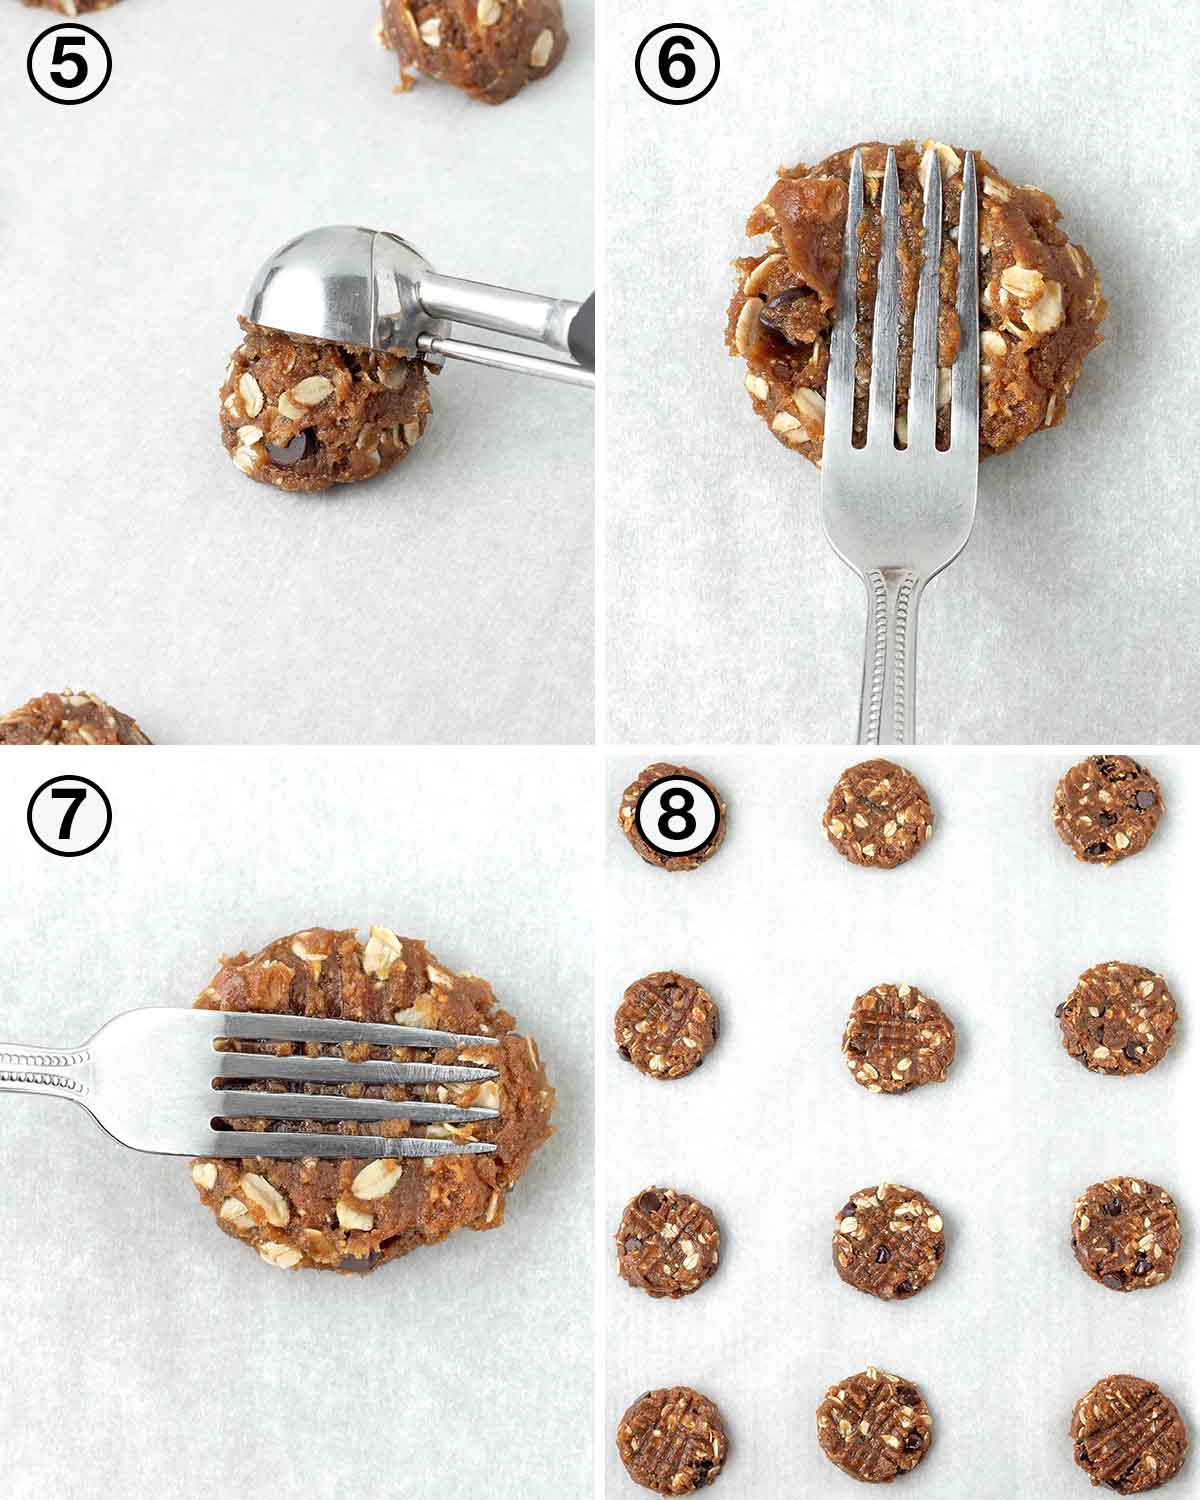 A collage of four images showing the second sequence of steps needed to make oatmeal peanut butter cookies.